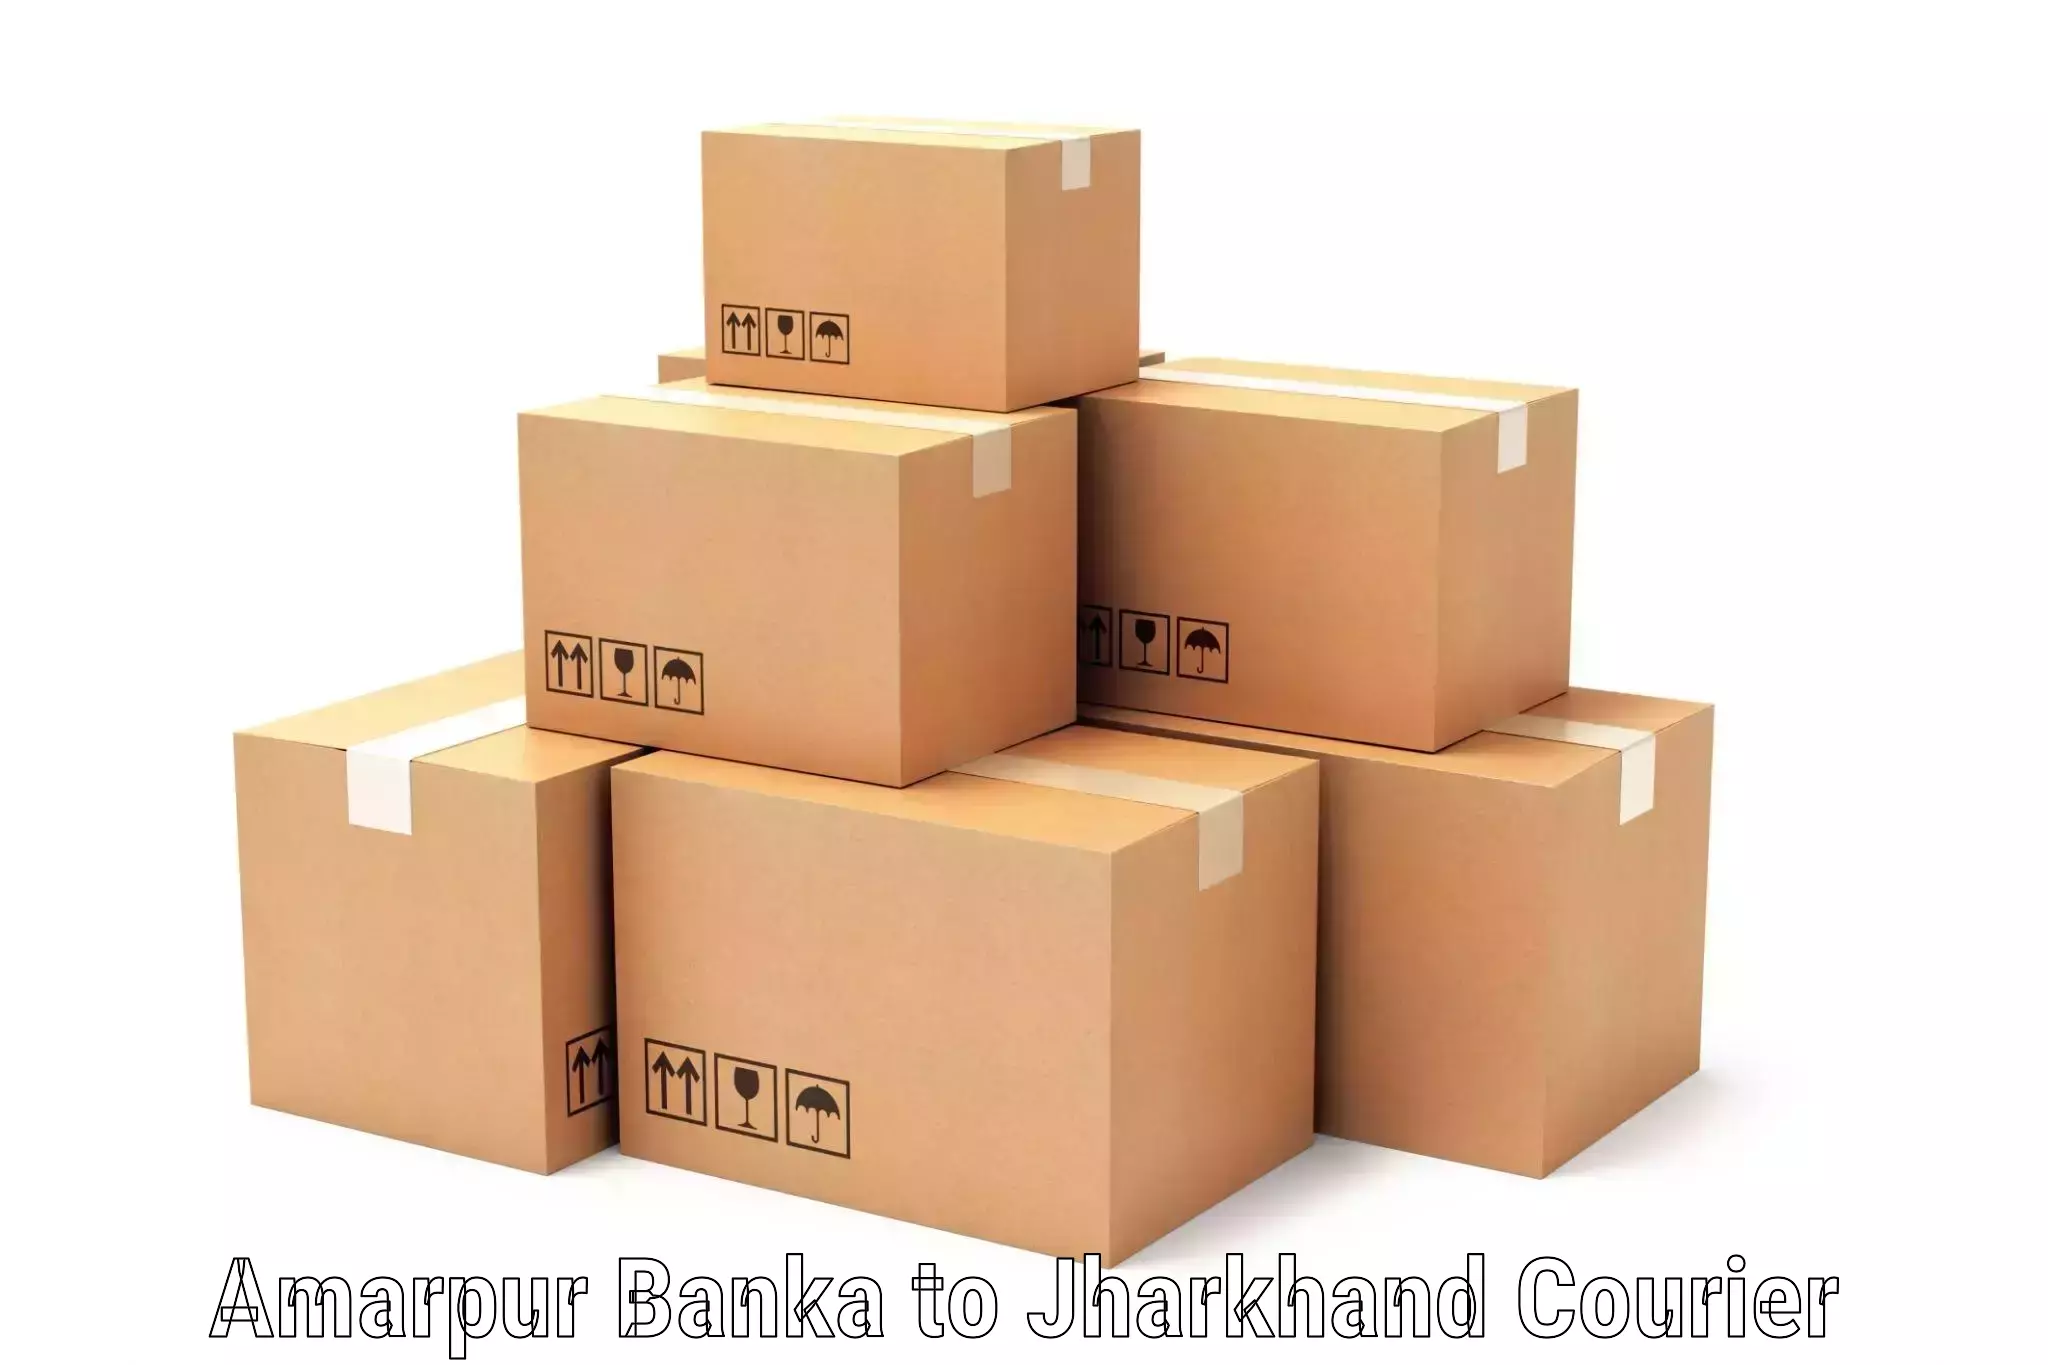 Quality courier services in Amarpur Banka to Godda